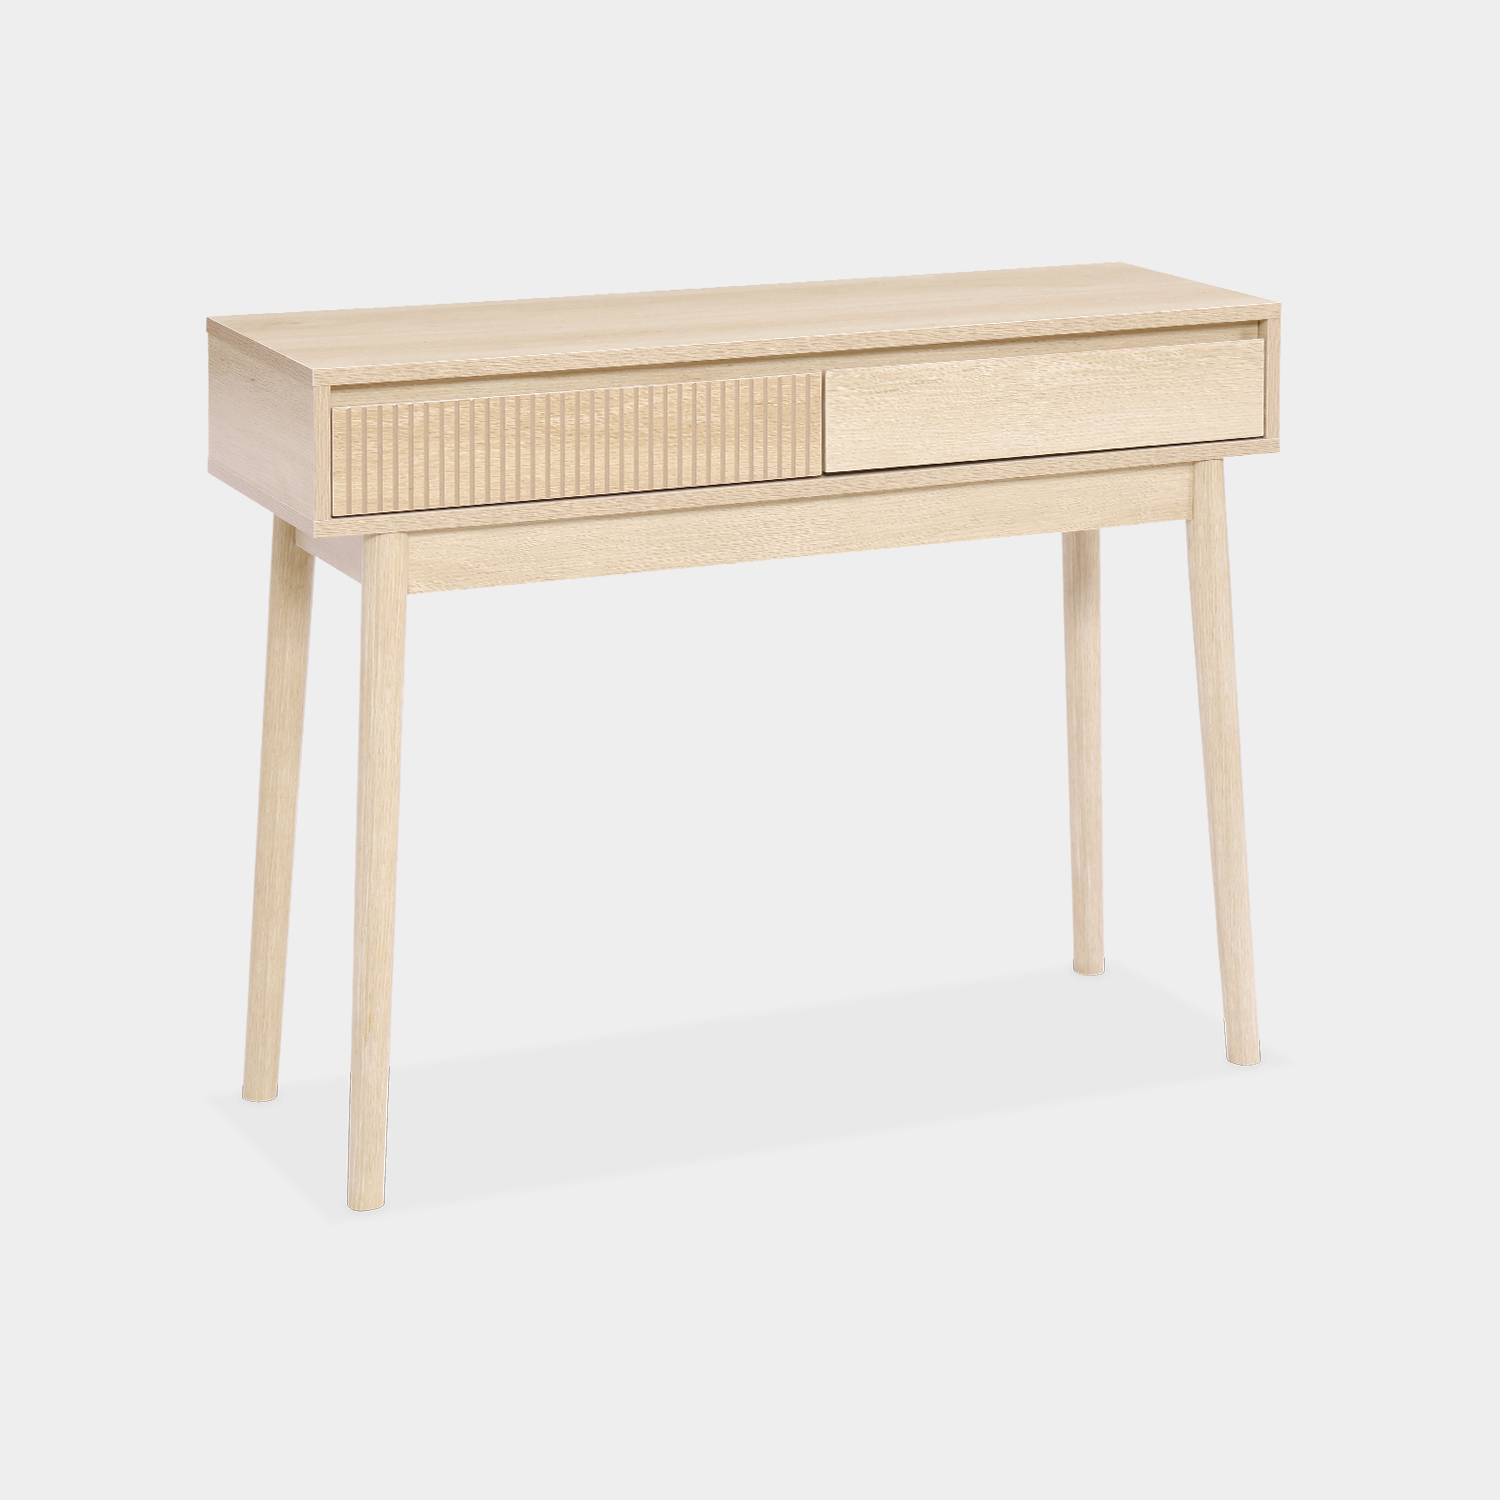 Grooved wood detail console table, 100x30x75cm, Linear, Natural wood colour,sweeek,Photo3